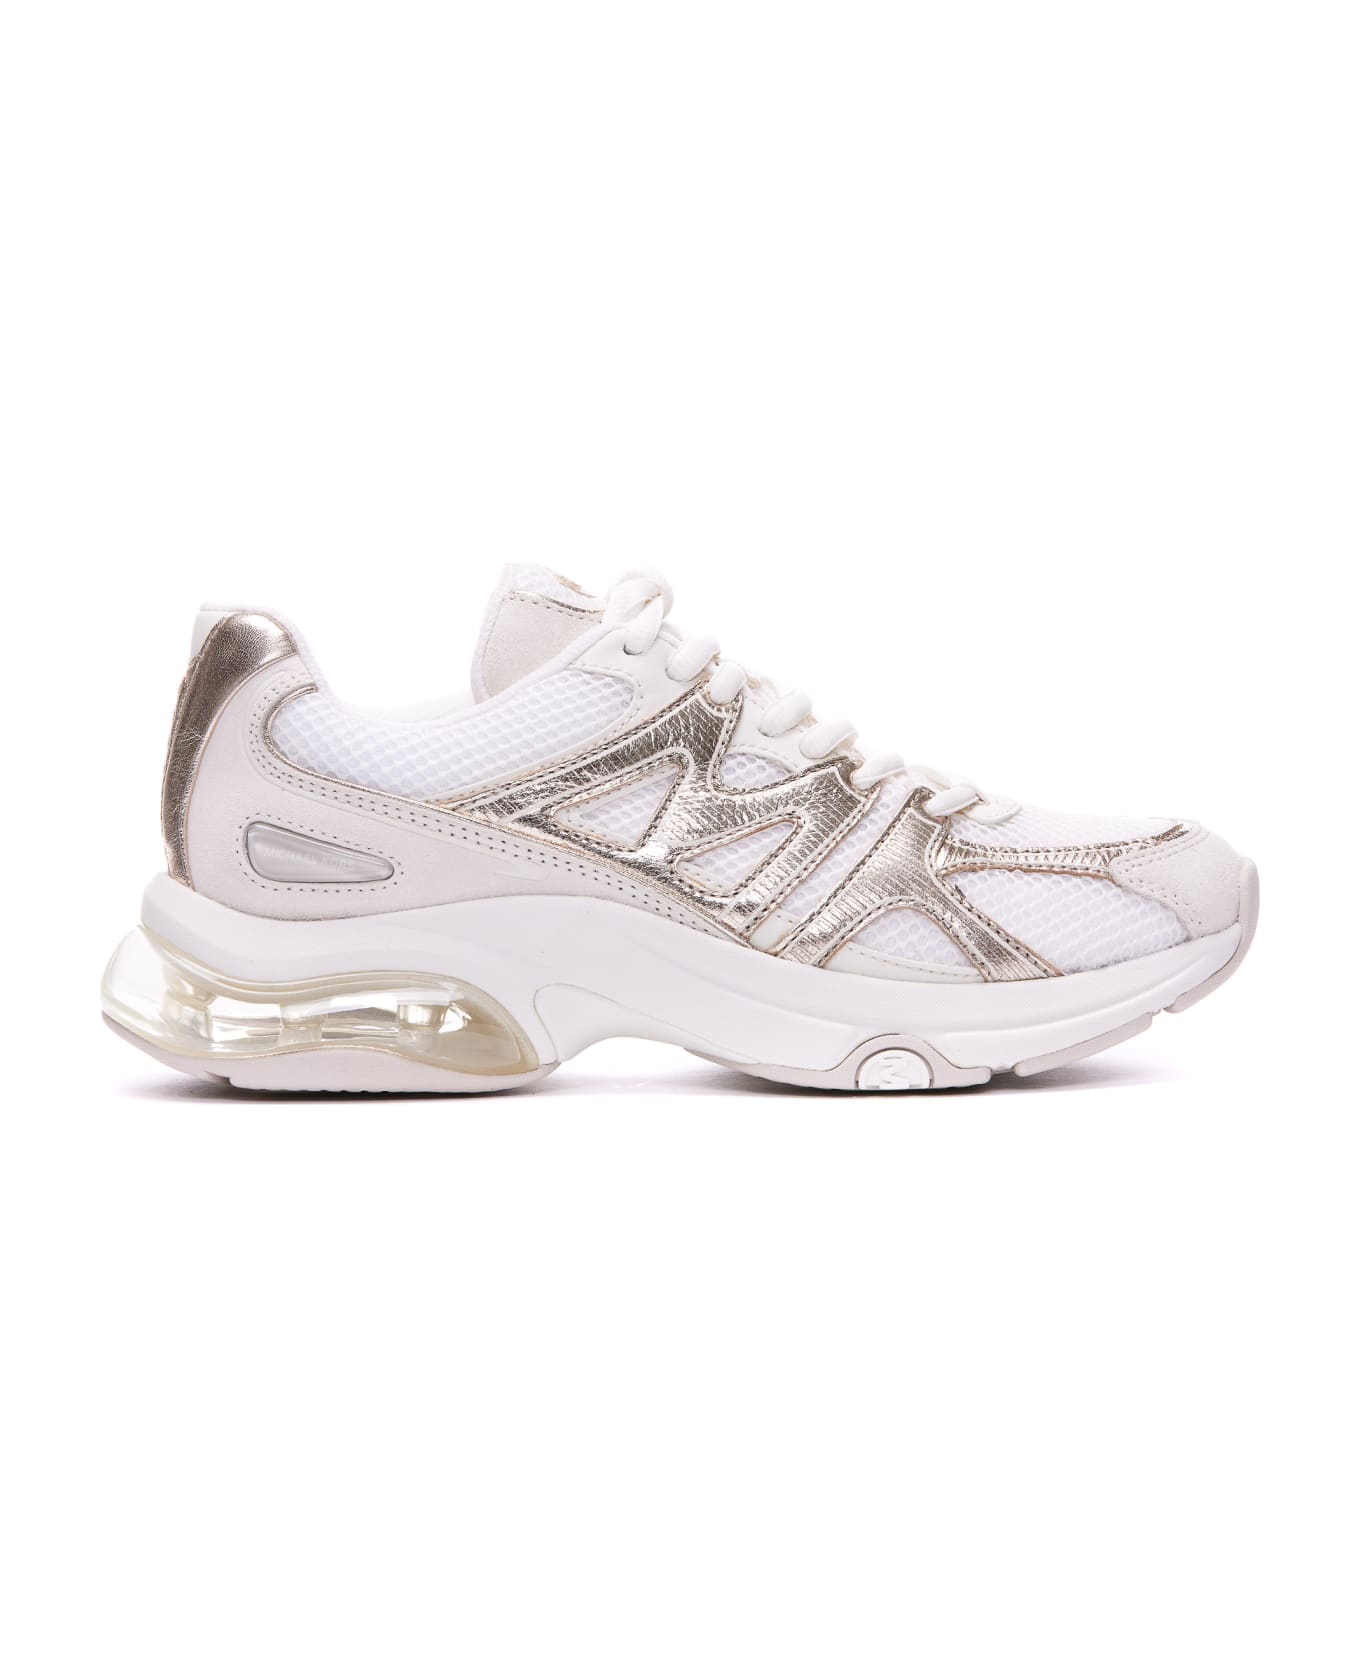 MICHAEL Michael Kors Active Sneakers In White Fabric - White